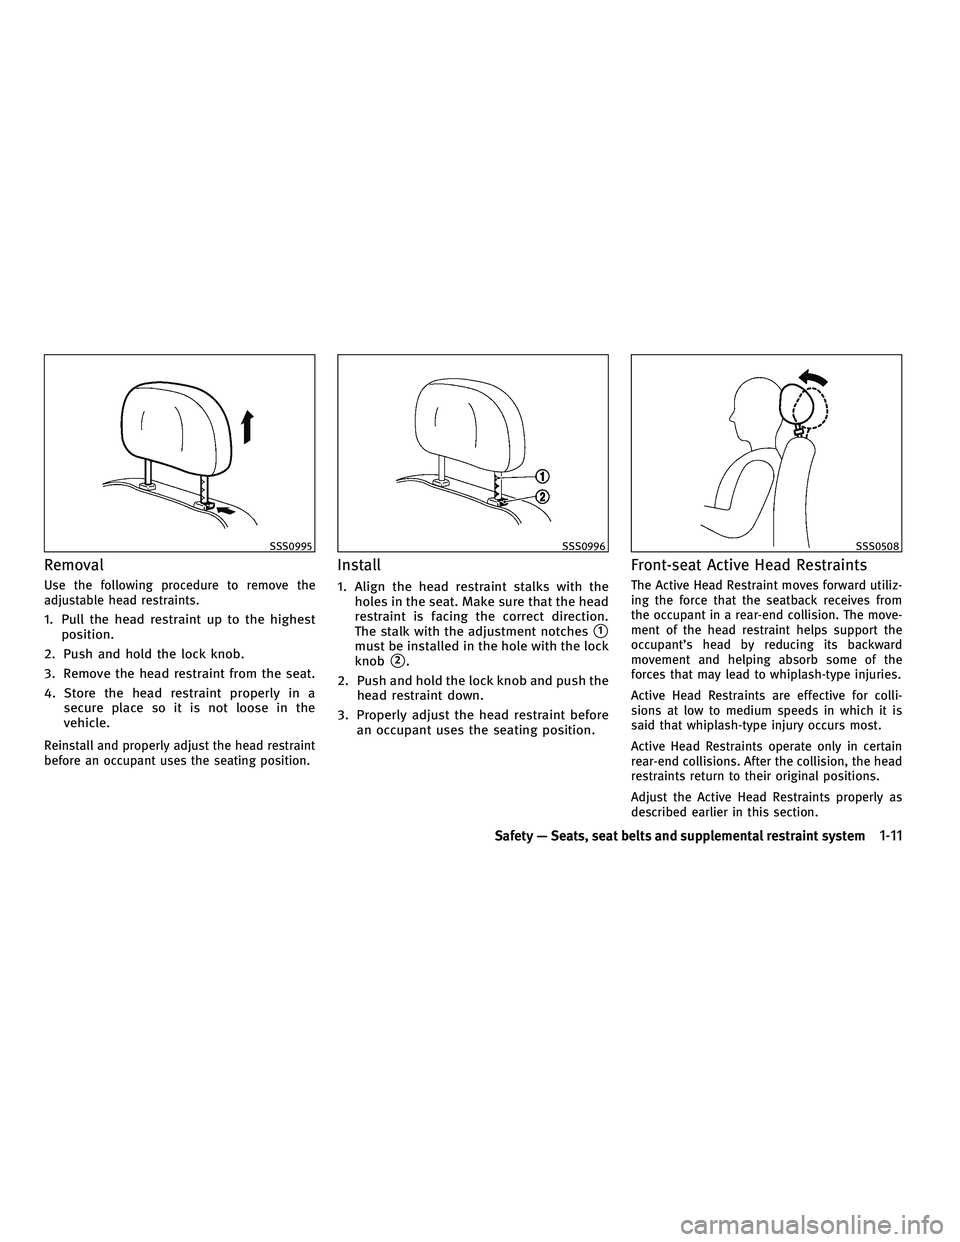 INFINITI G 2010 Owners Guide Removal
Use the following procedure to remove the
adjustable head restraints.
1. Pull the head restraint up to the highestposition.
2. Push and hold the lock knob.
3. Remove the head restraint from th